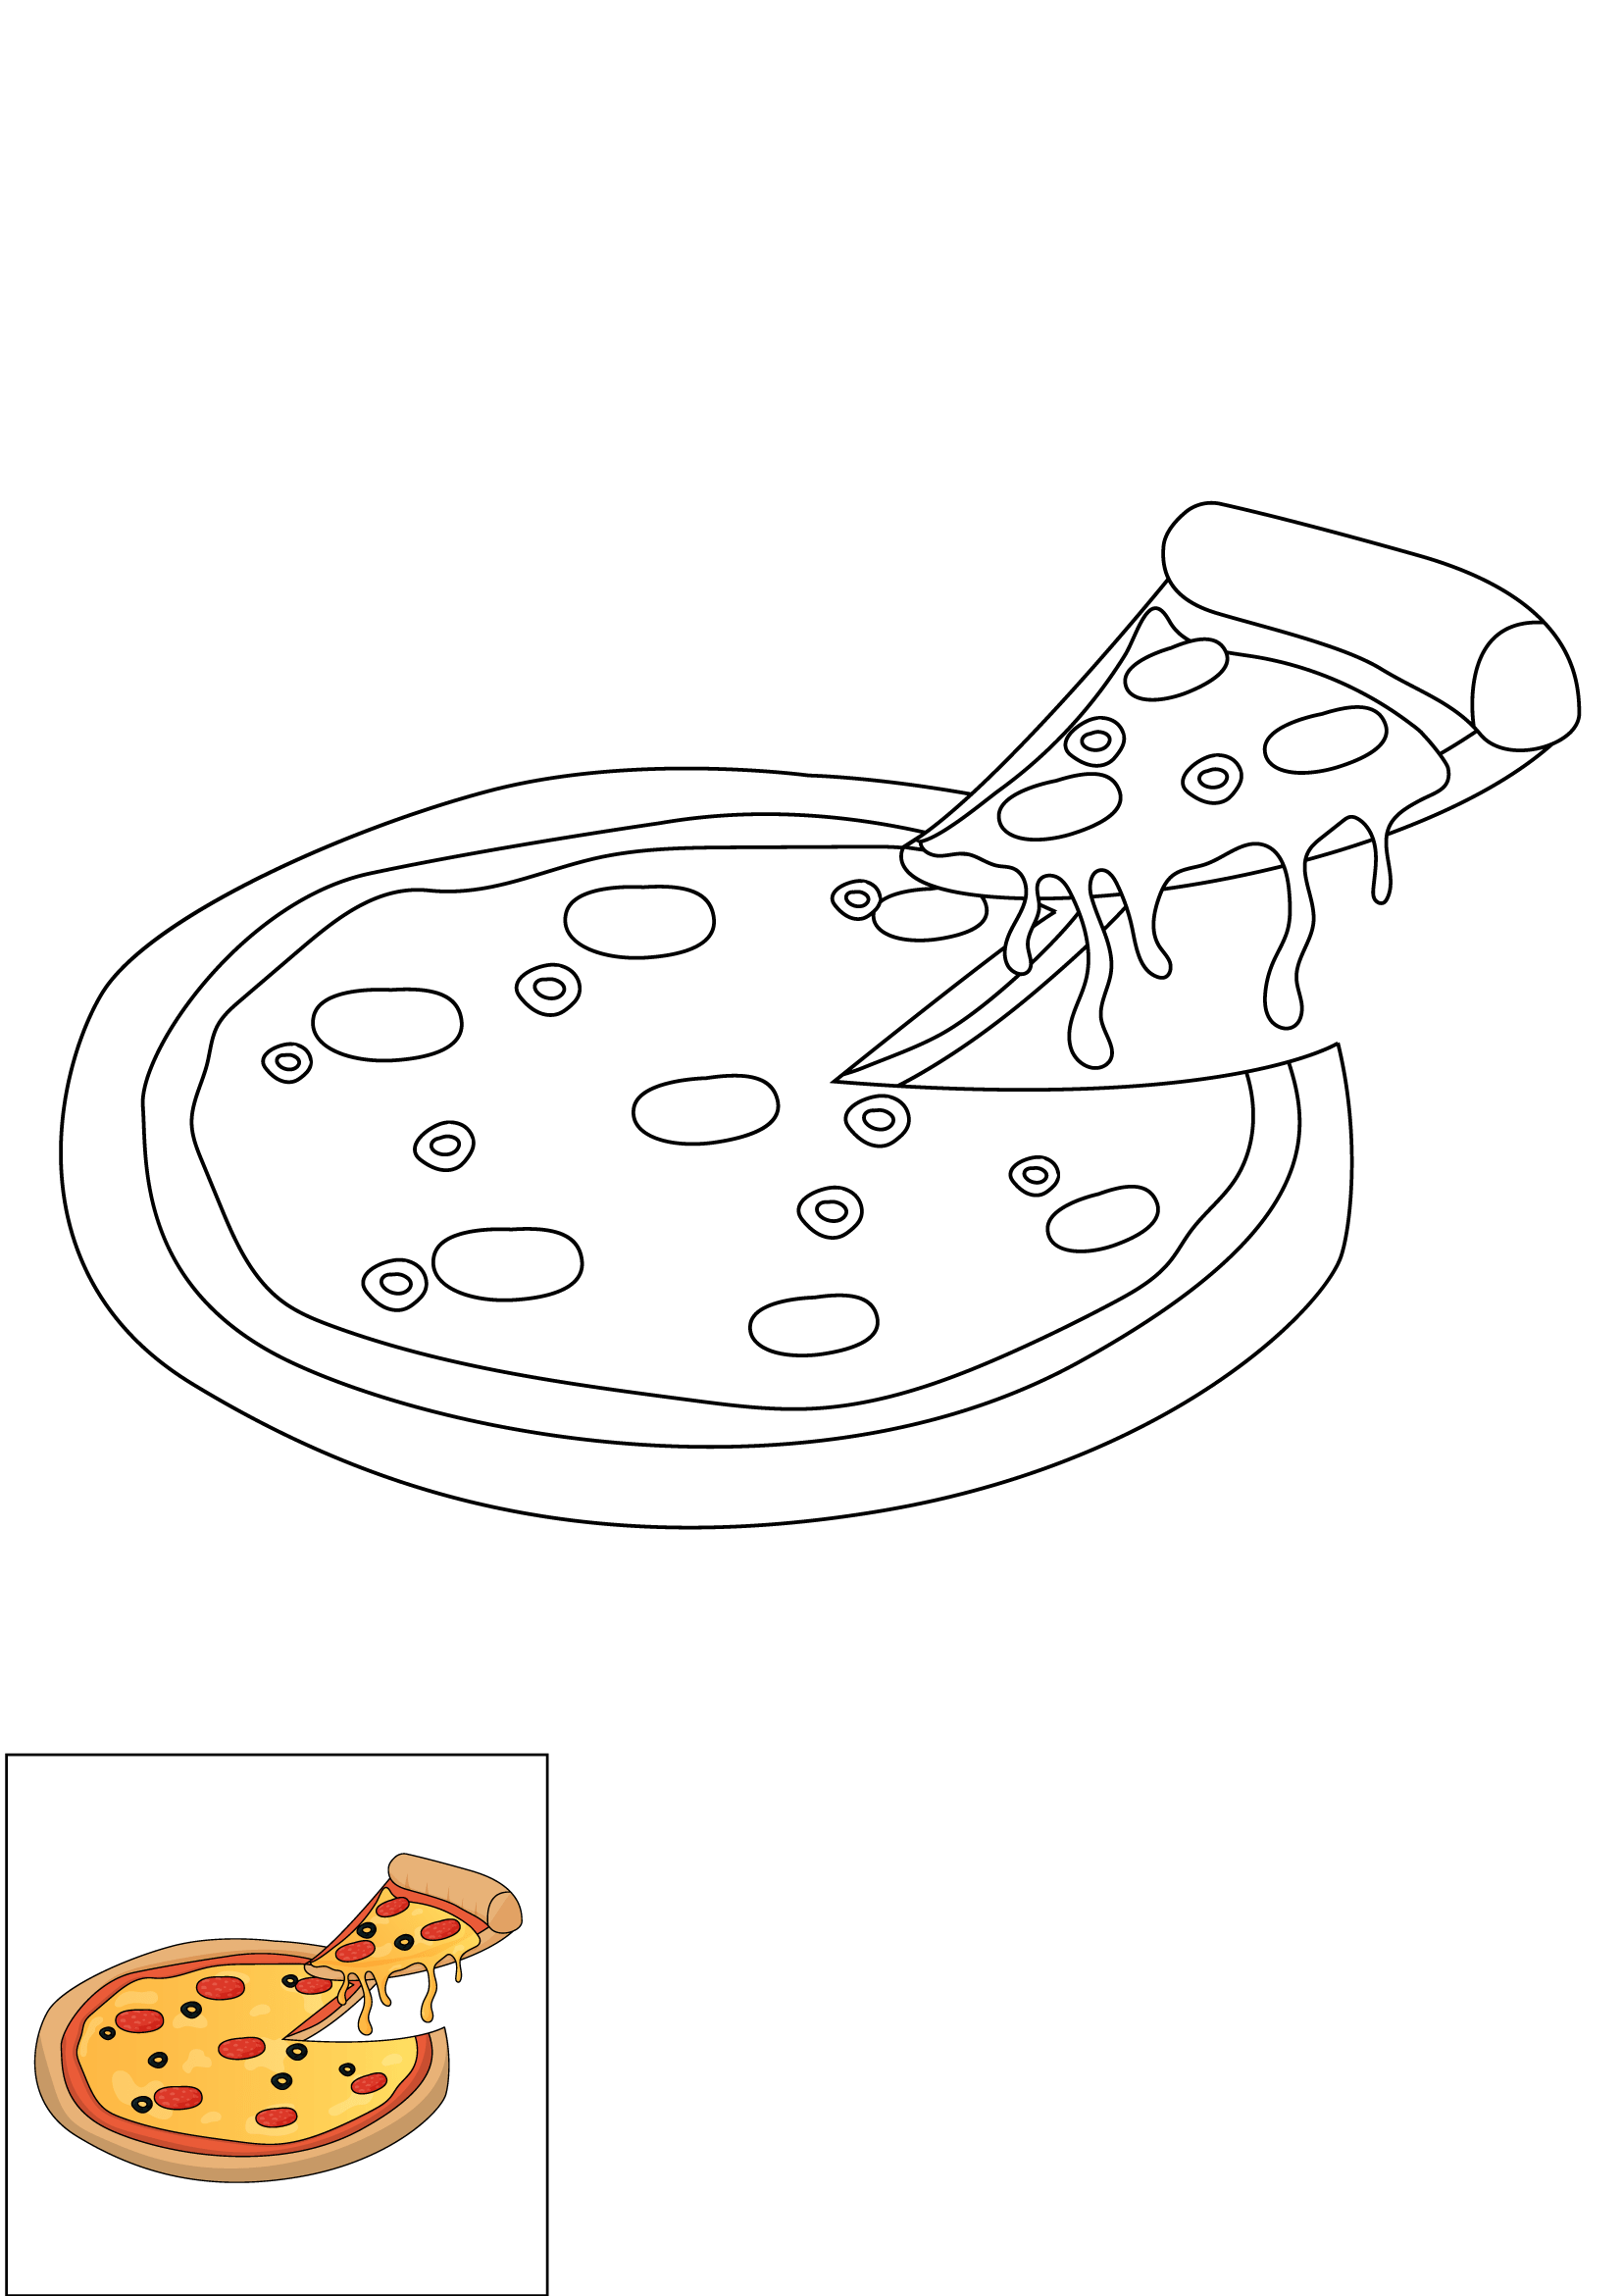 How to Draw A Pizza Step by Step Printable Color